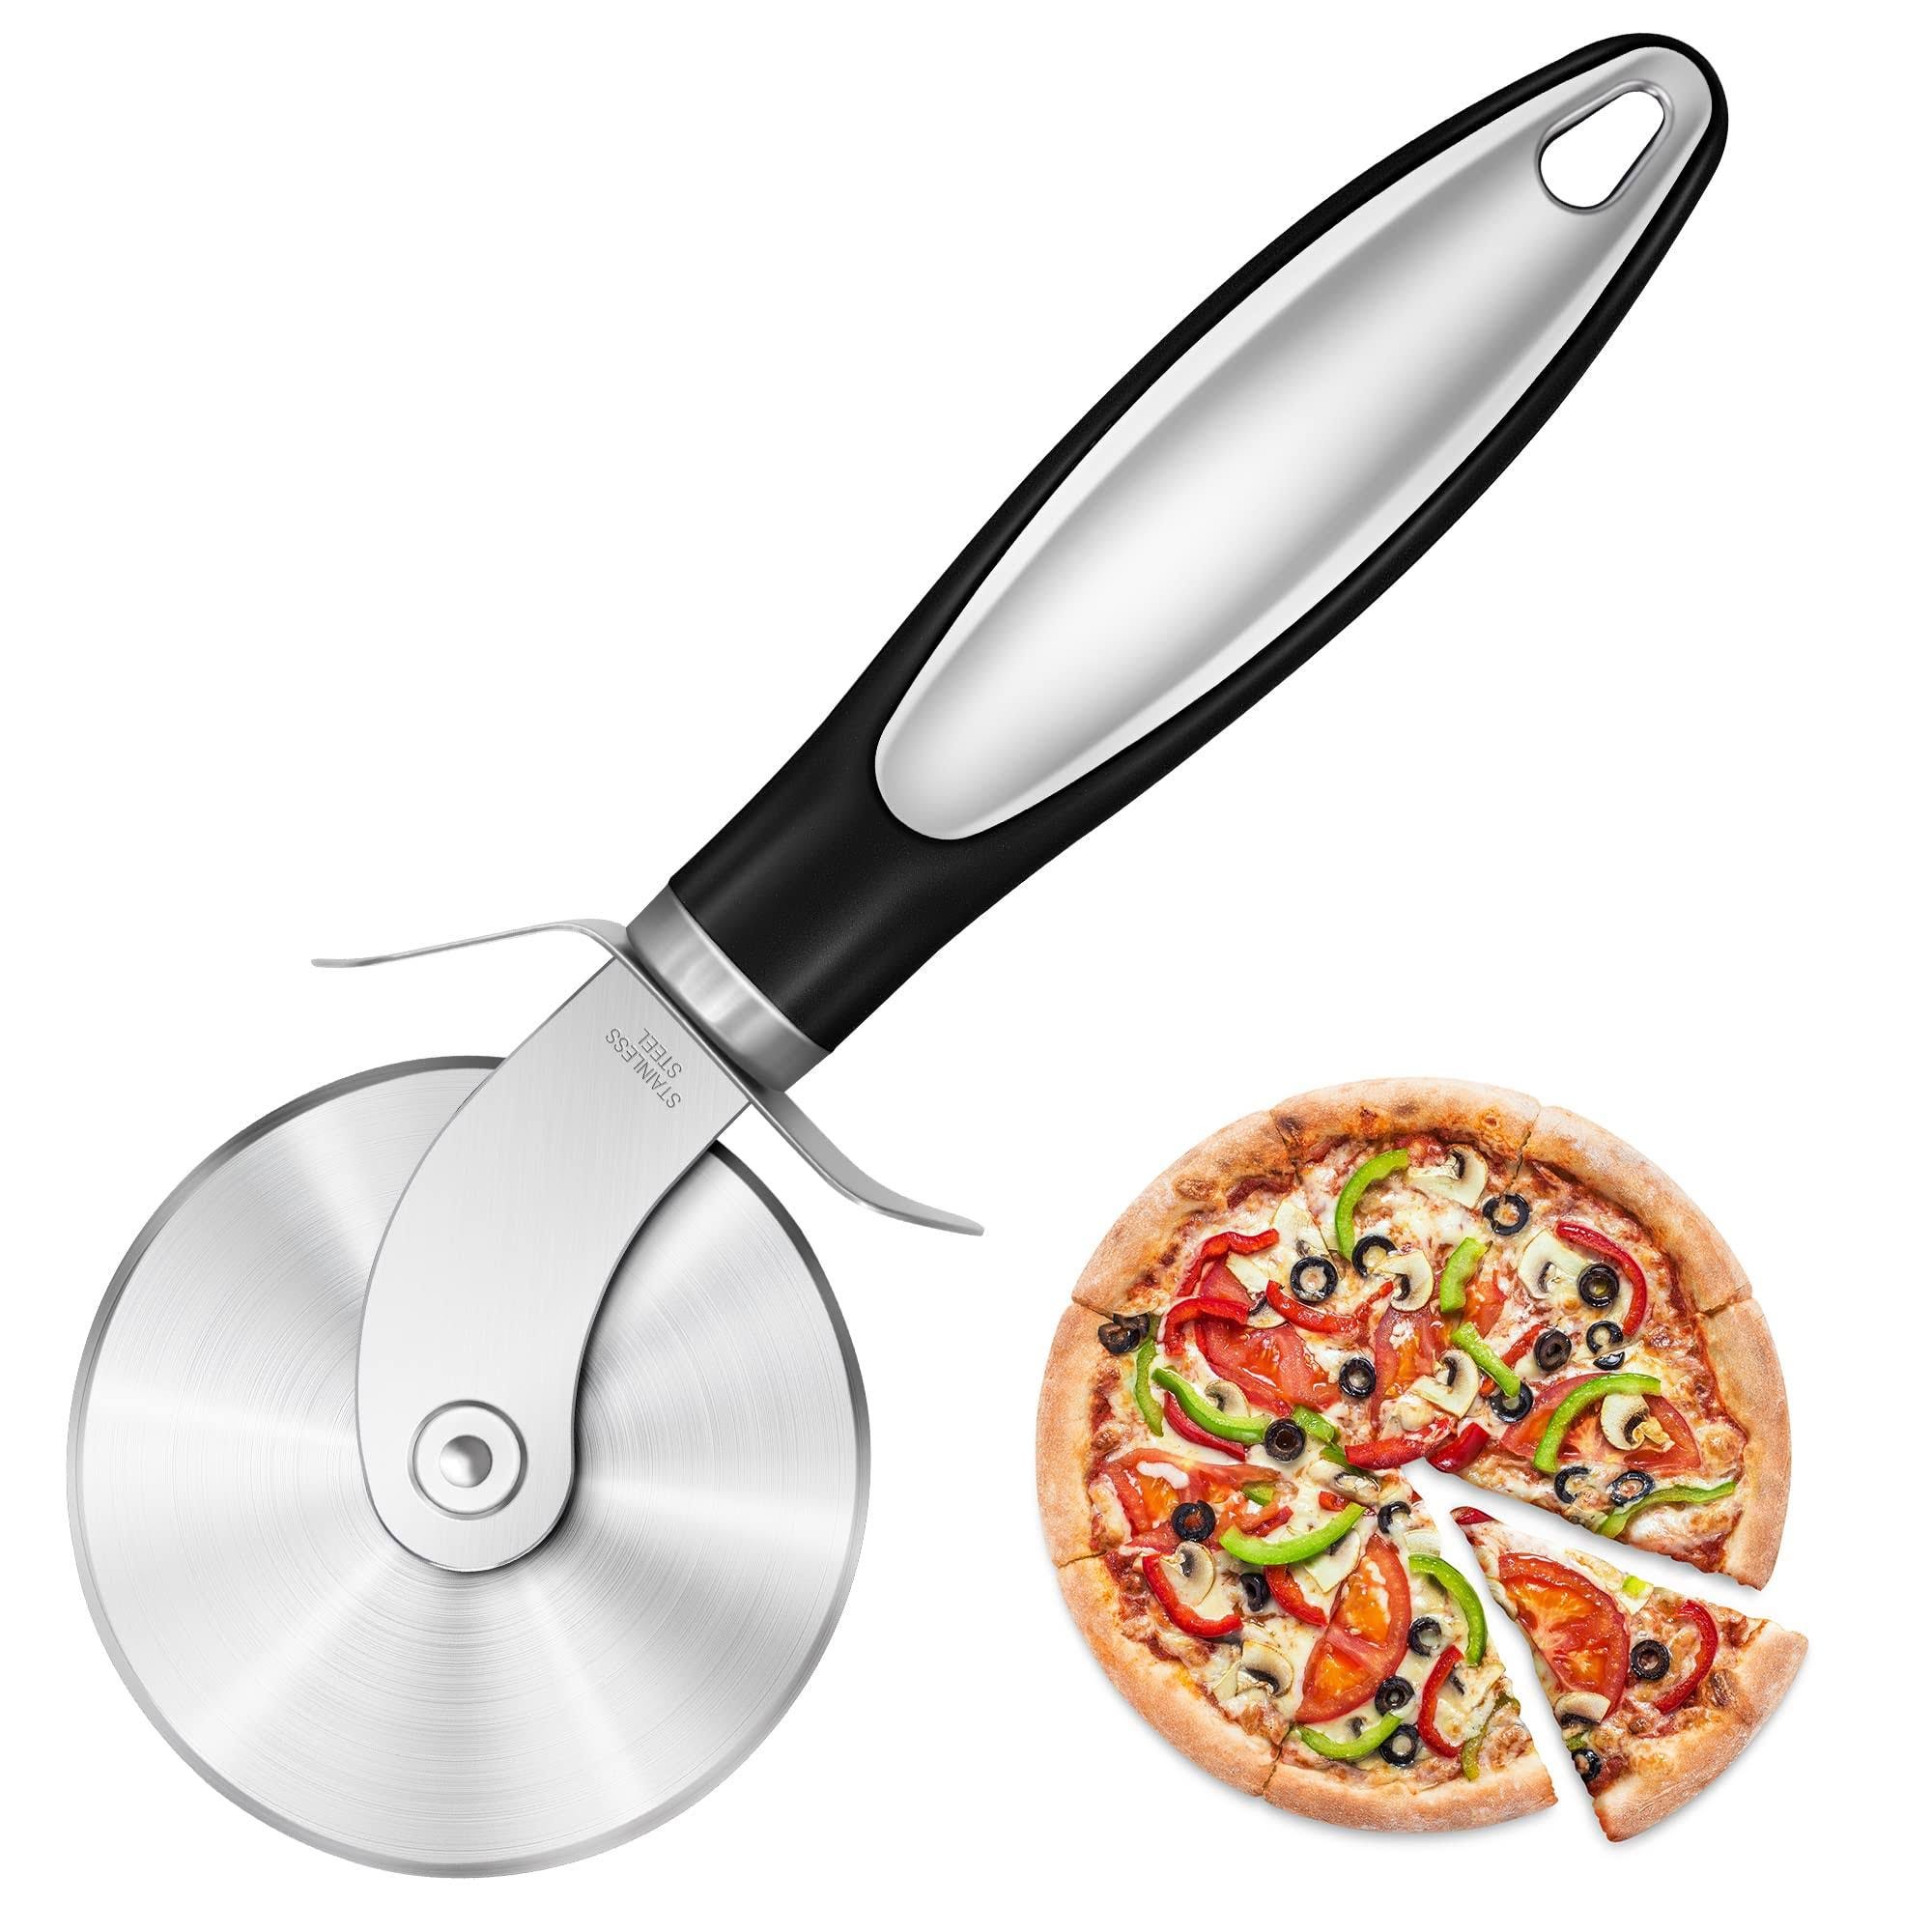 Rainspire Large Stainless Steel Pizza Cutter Wheel with Non-Slip Handle | Image